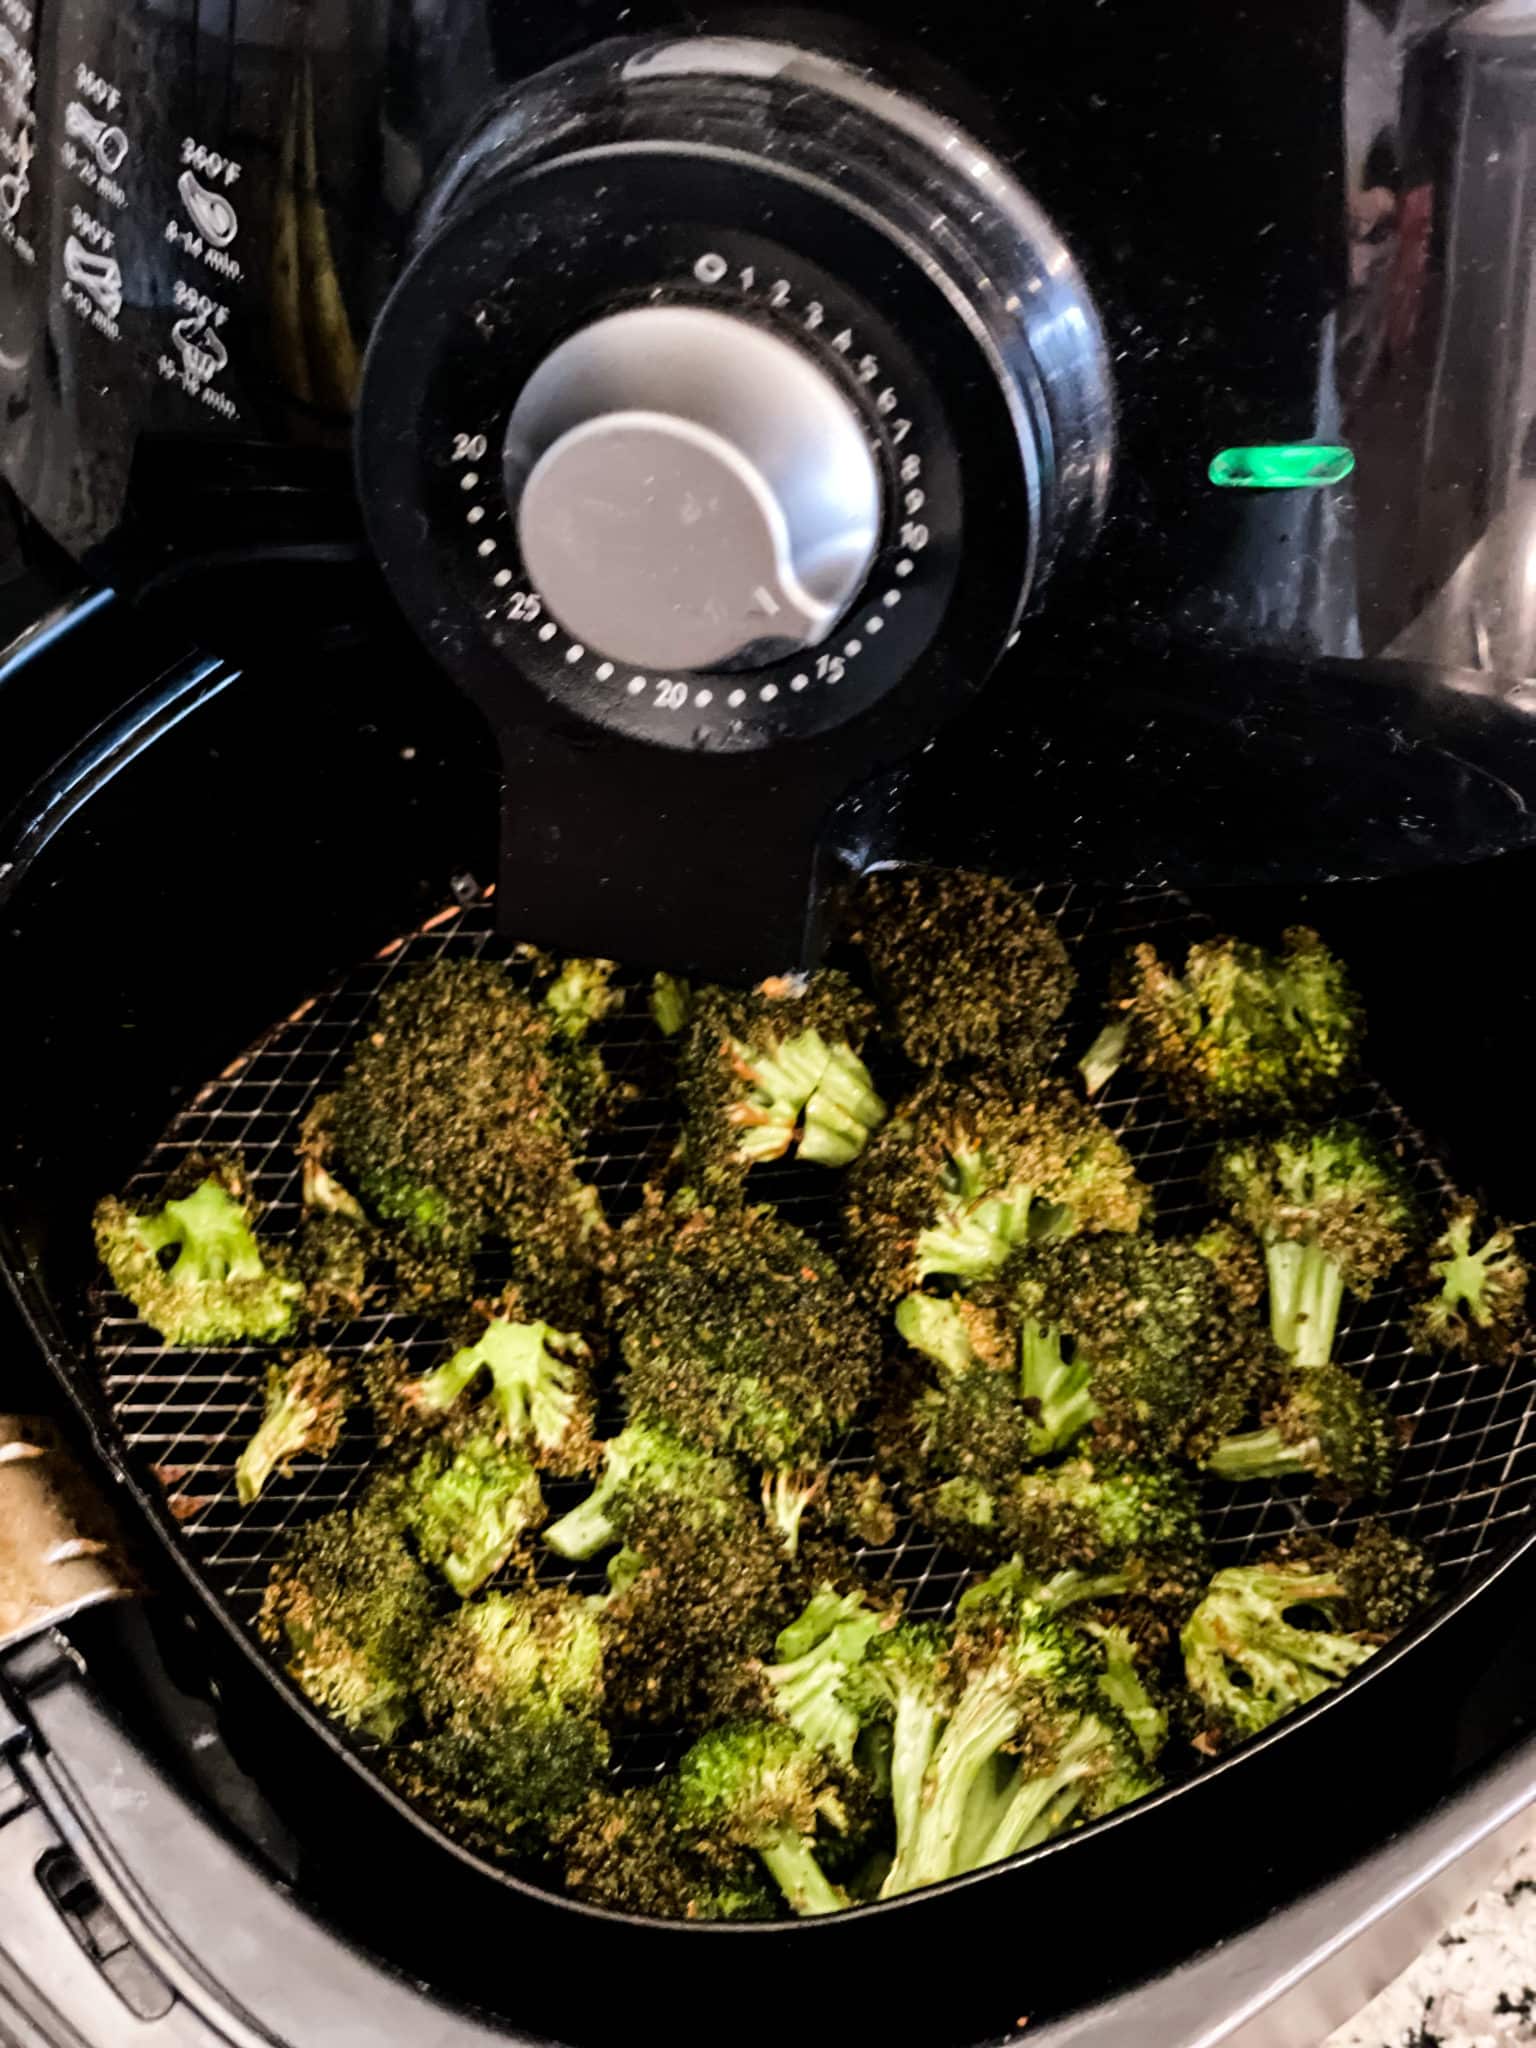 Broccoli florets in the basket of an air fryer